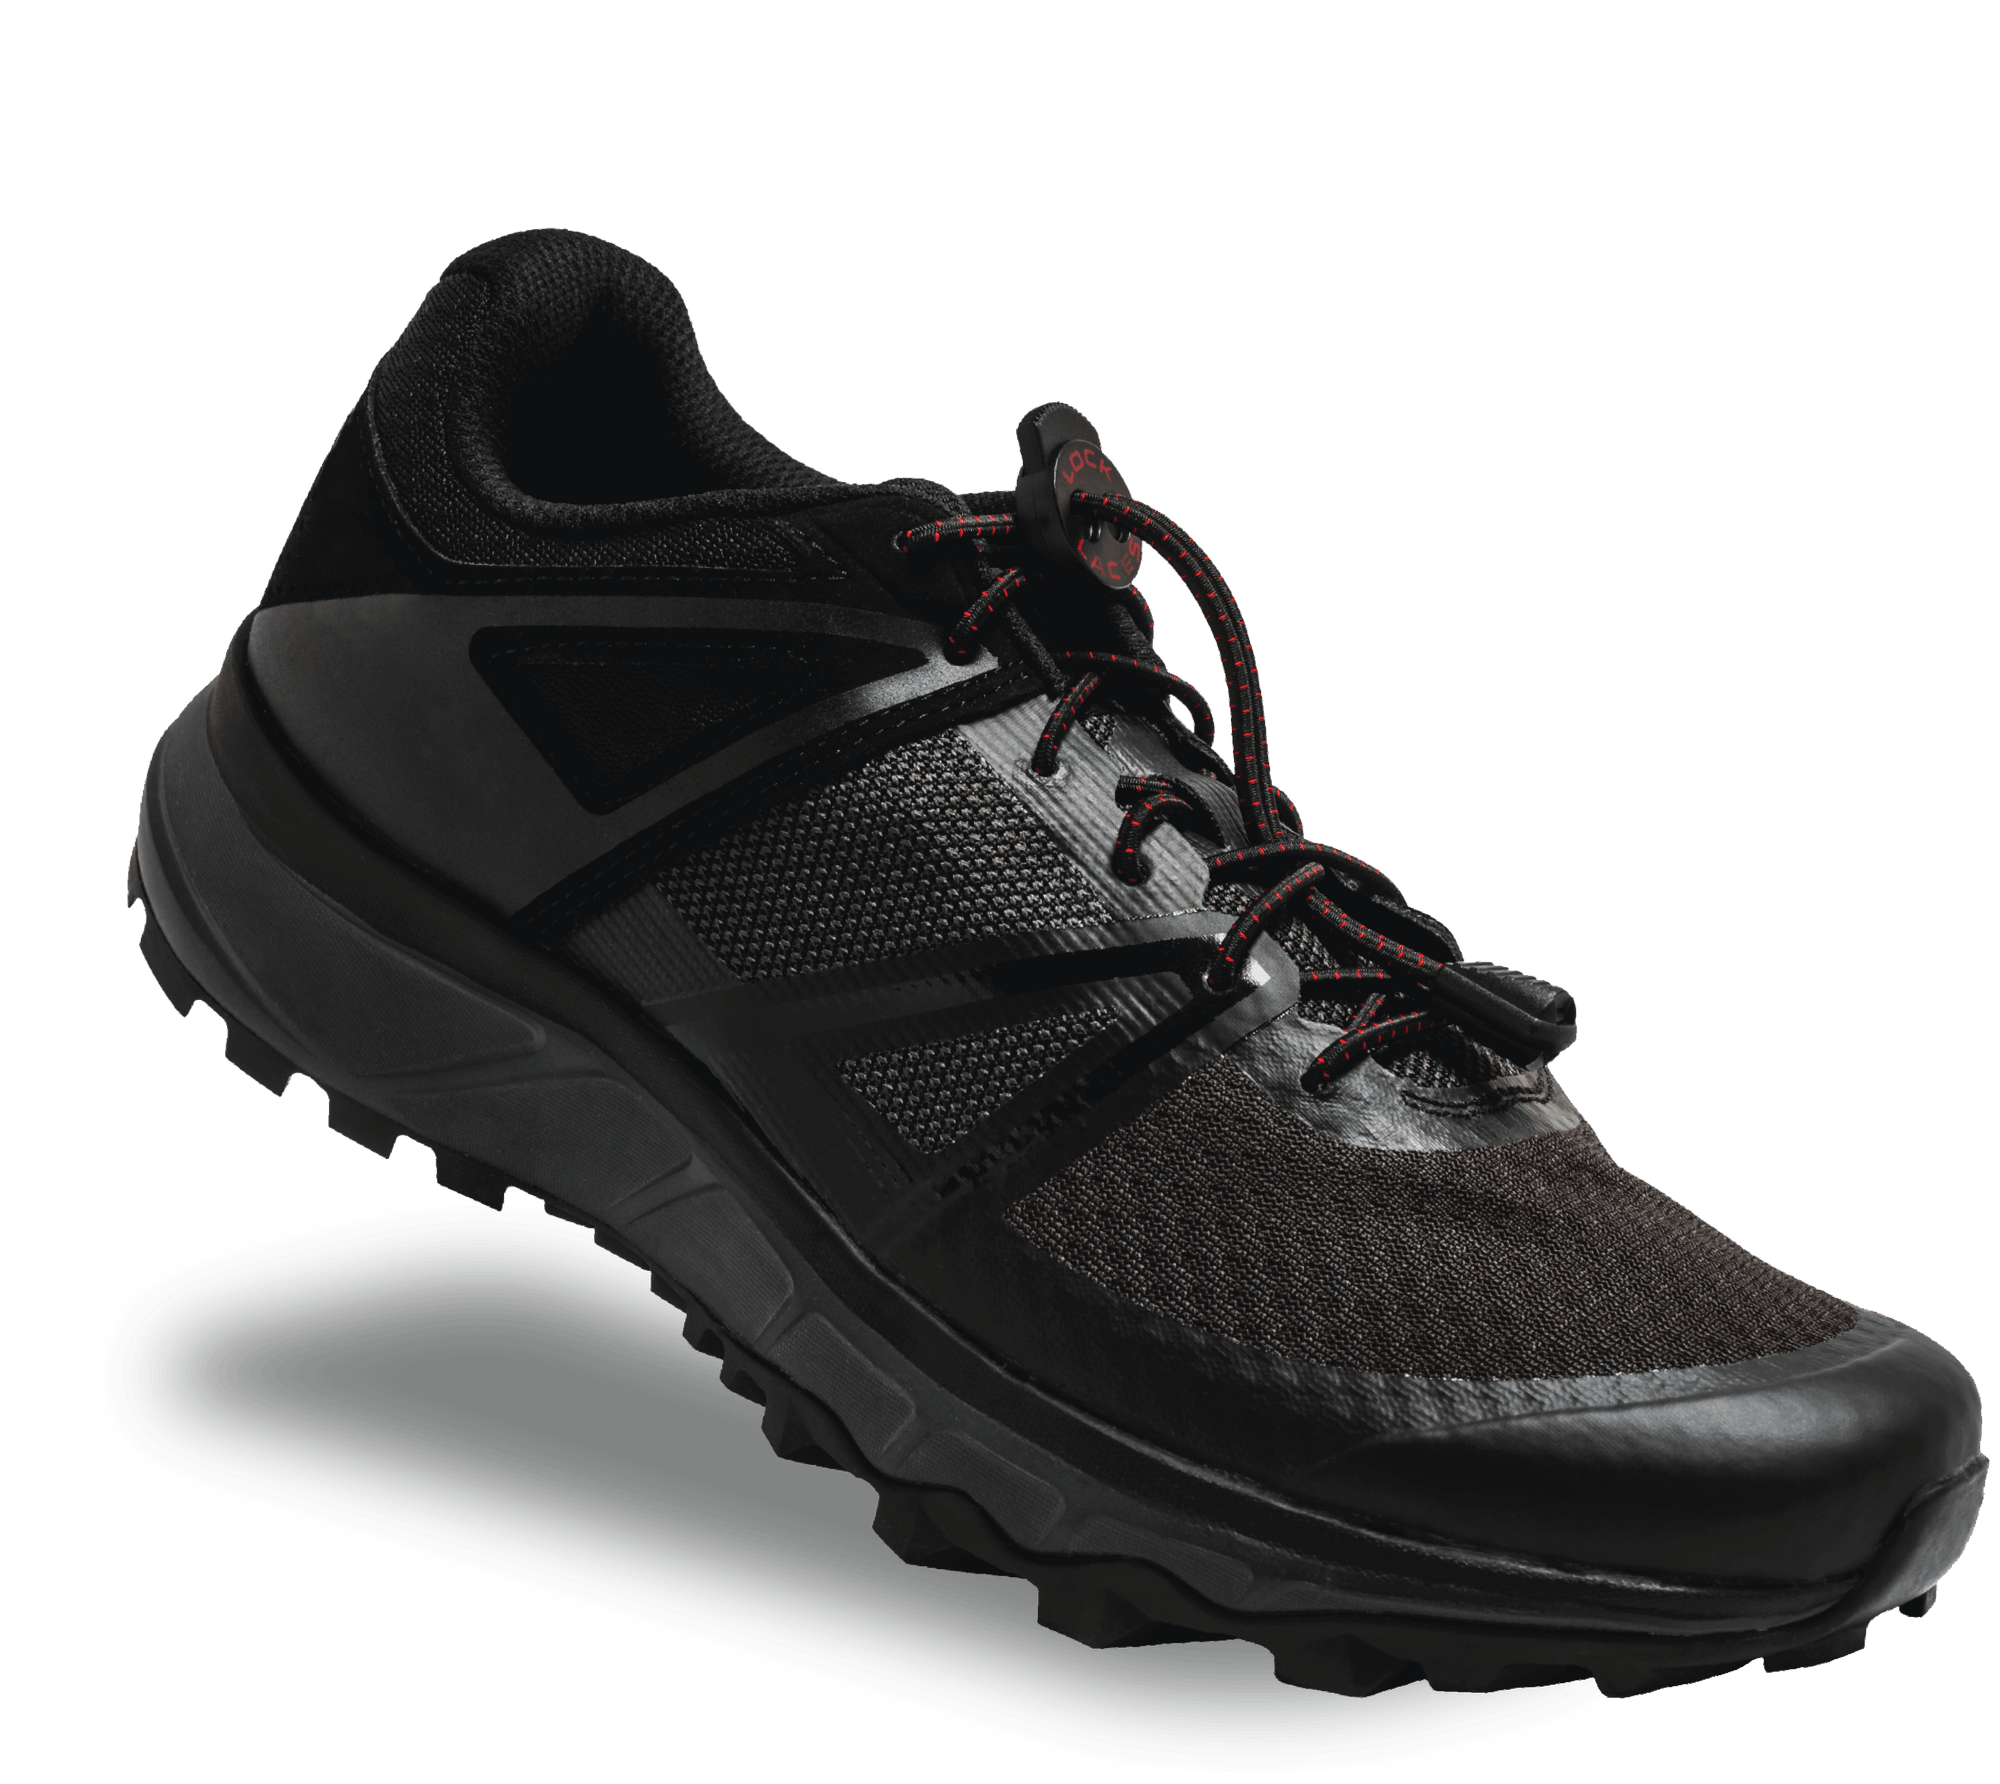 RK Pro Series Obstacle Course Racing No-Tie Shoelaces